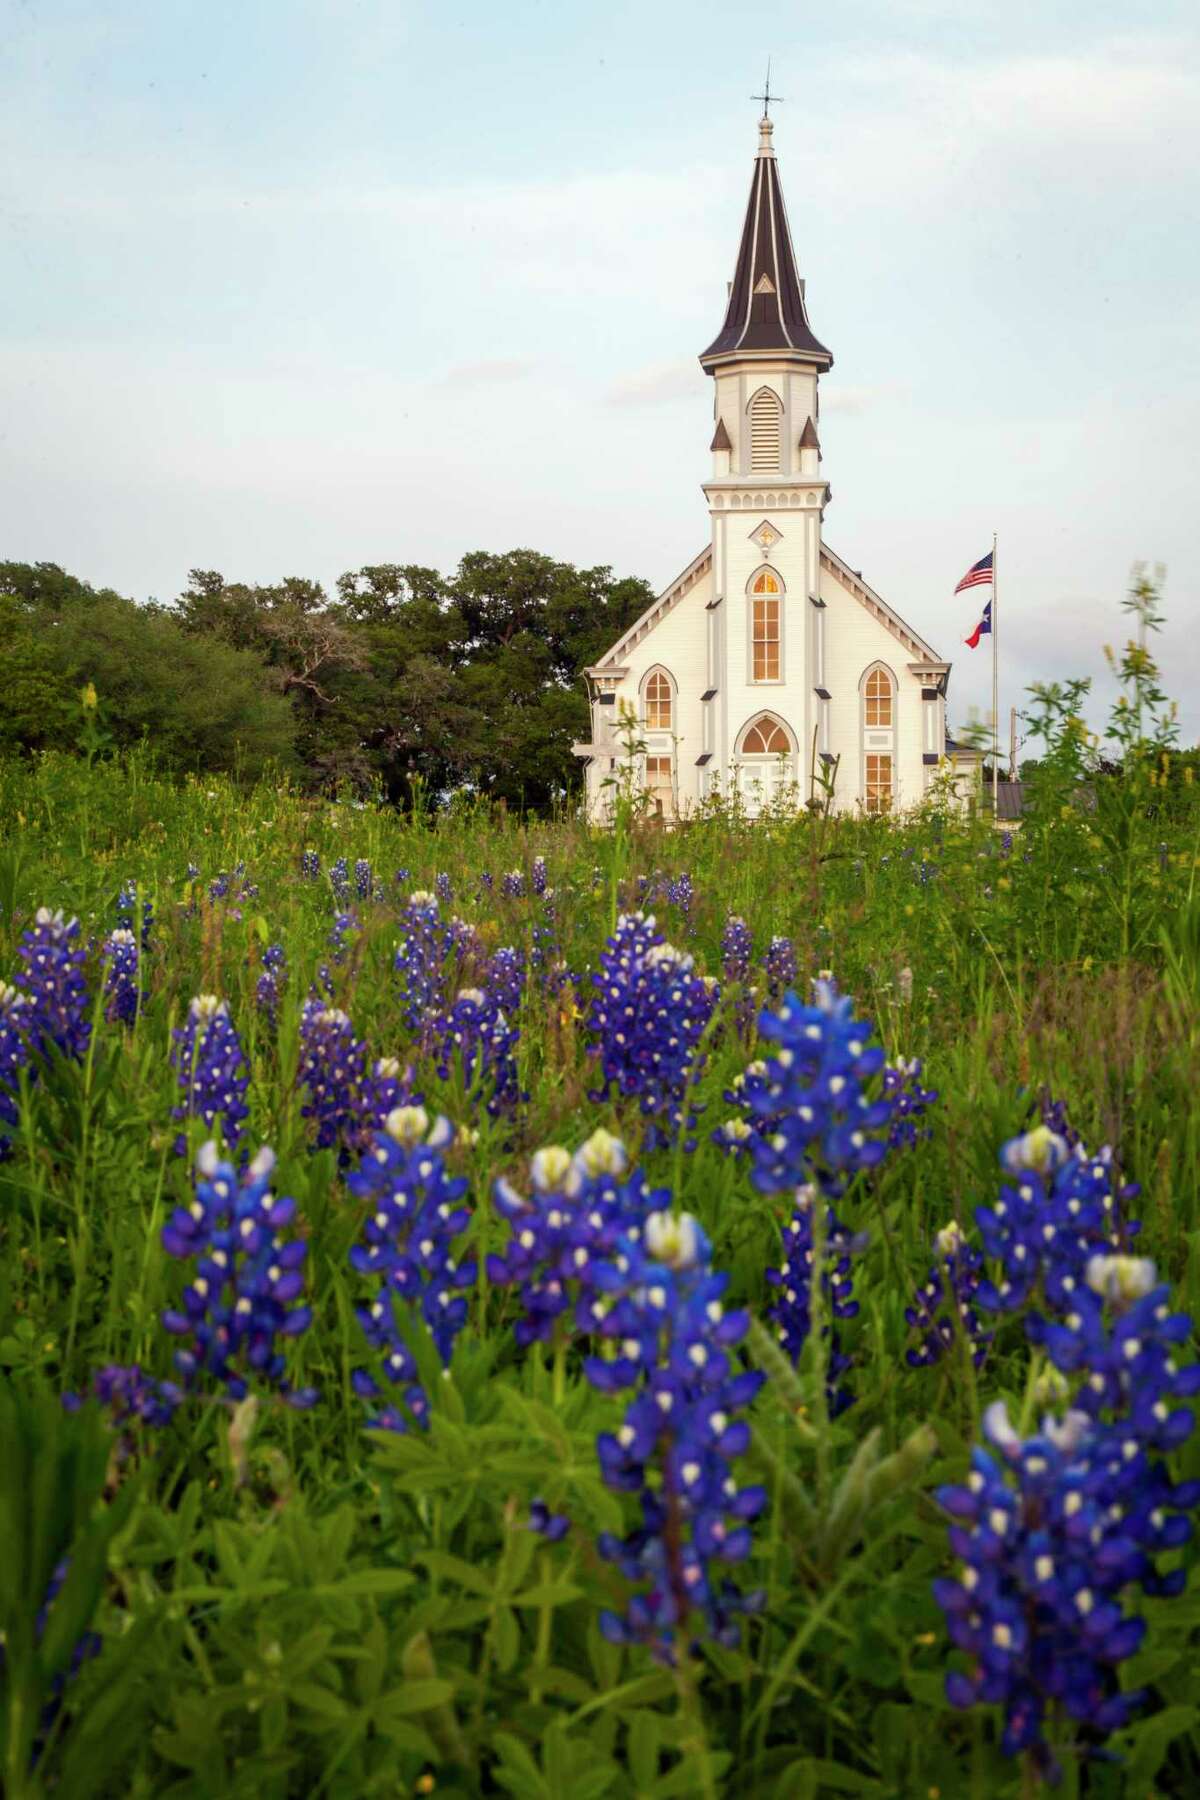 Sts. Cyril and Methodius Church rises over a field of bluebonnets in Dubina, Texas.